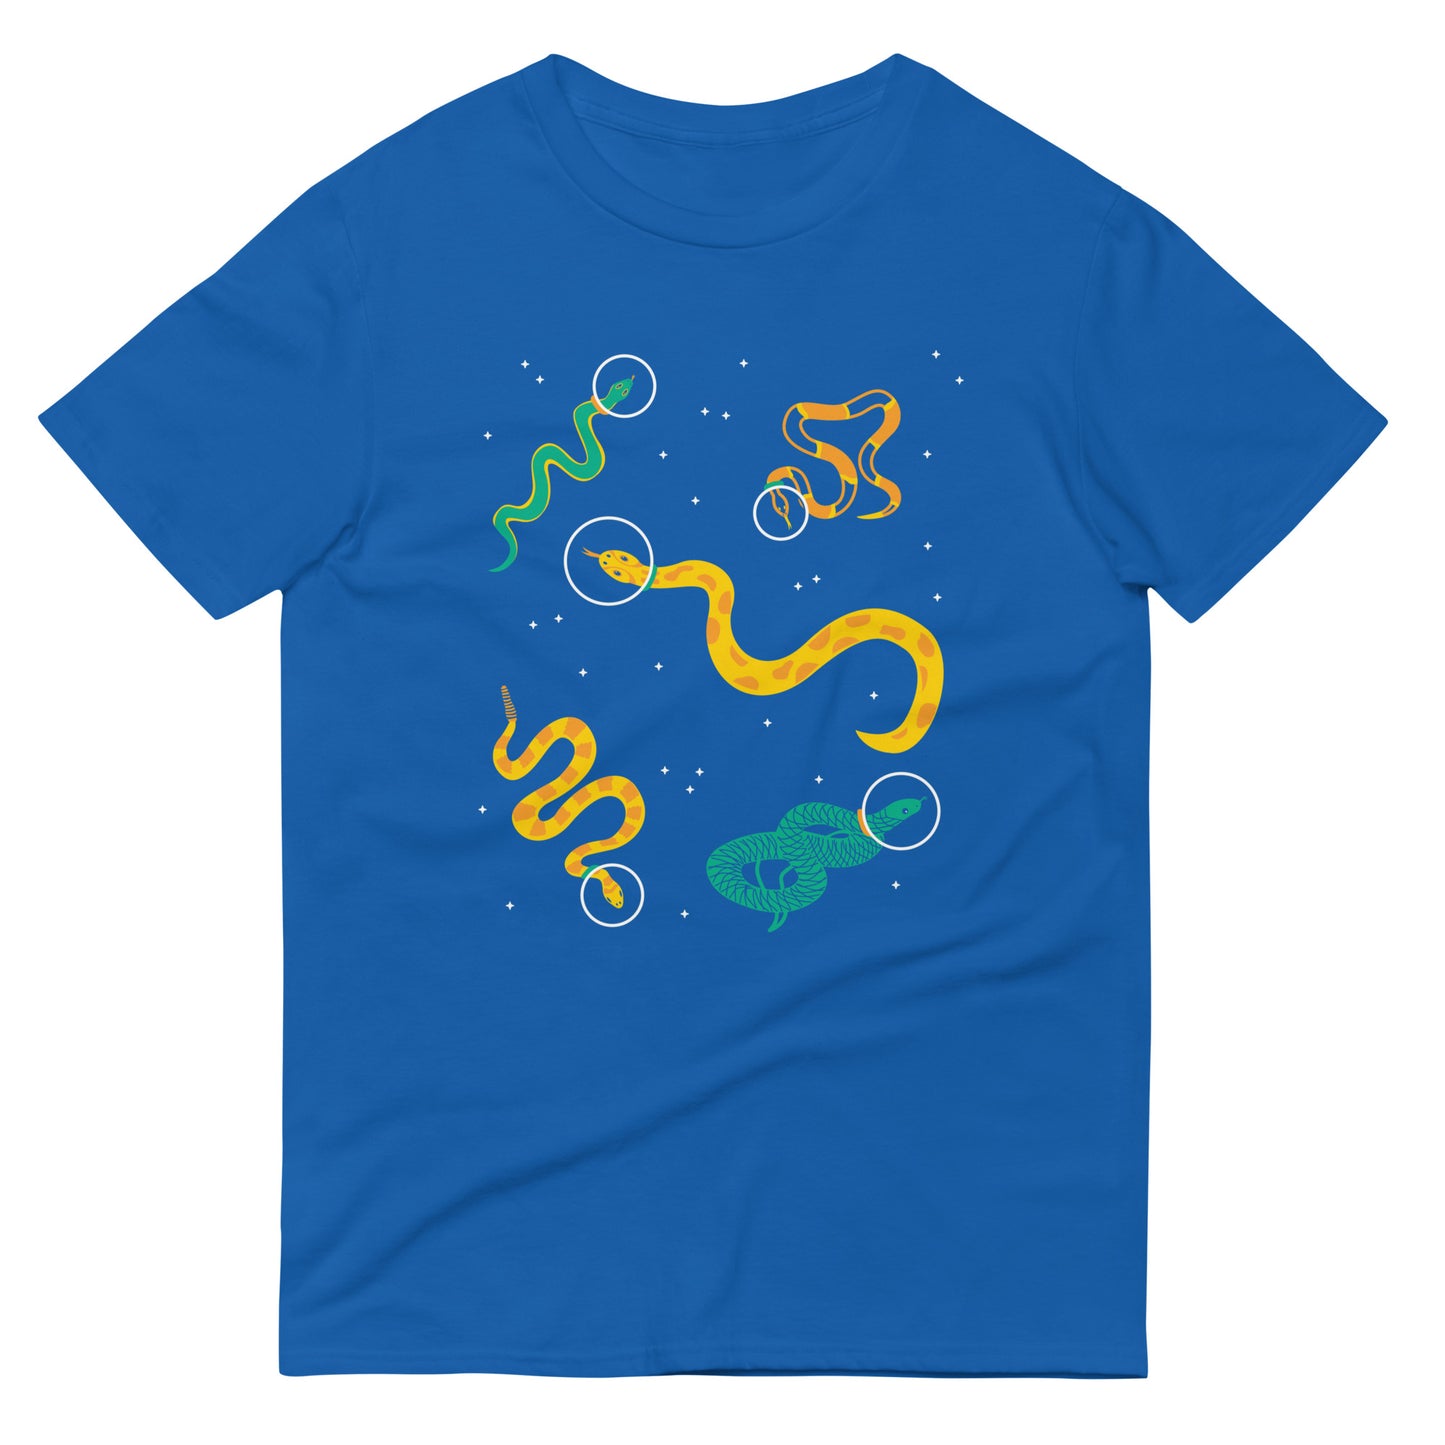 Snakes In Space Men's Signature Tee